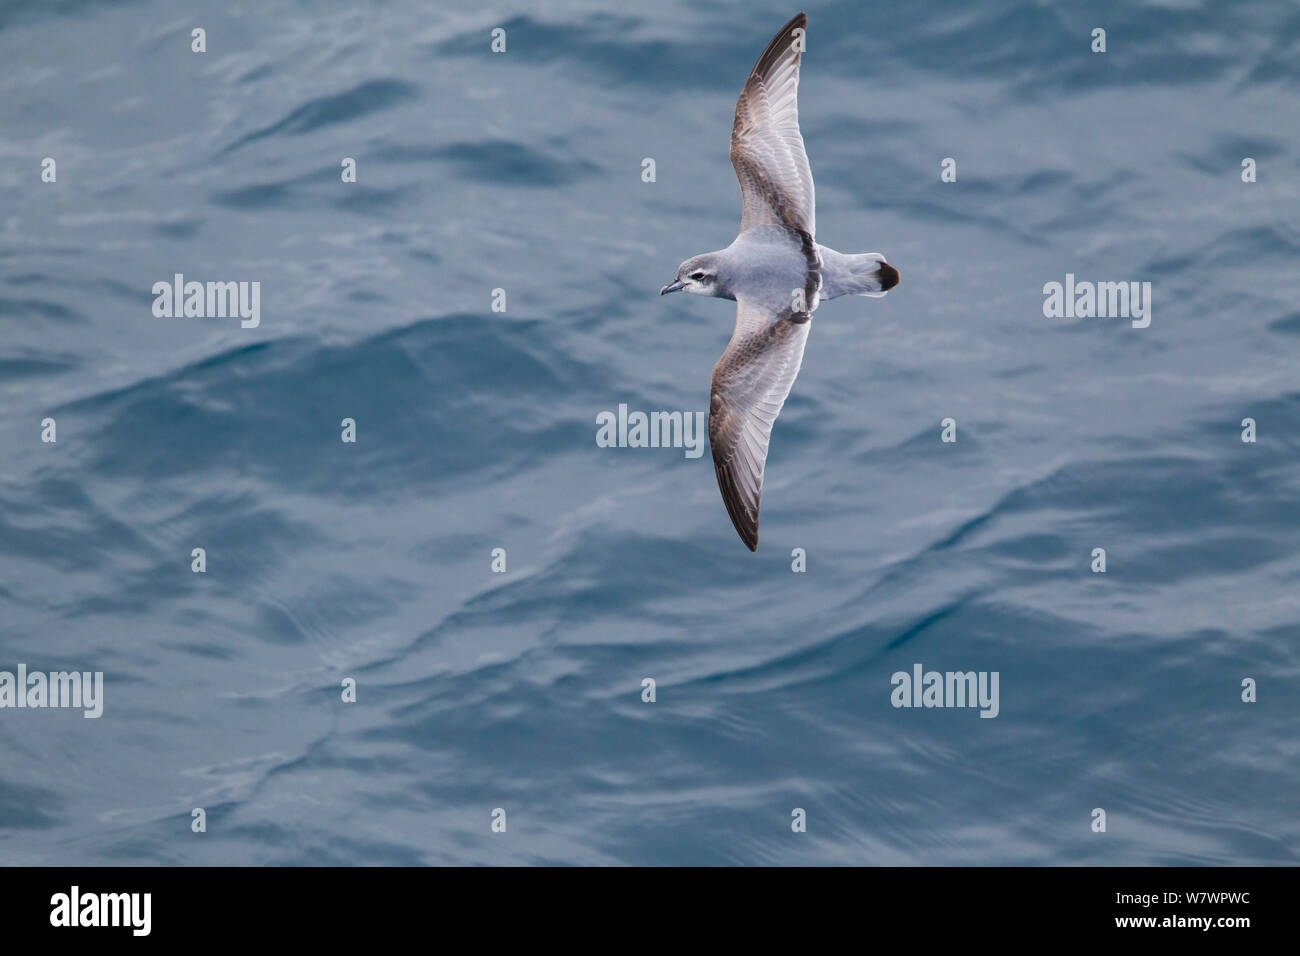 Antarctic prion (Pachyptila desolata) in flight low over the sea, showing upperwing pattern. Between the Falkland Islands and South Georgia, South Atlantic. January. Stock Photo